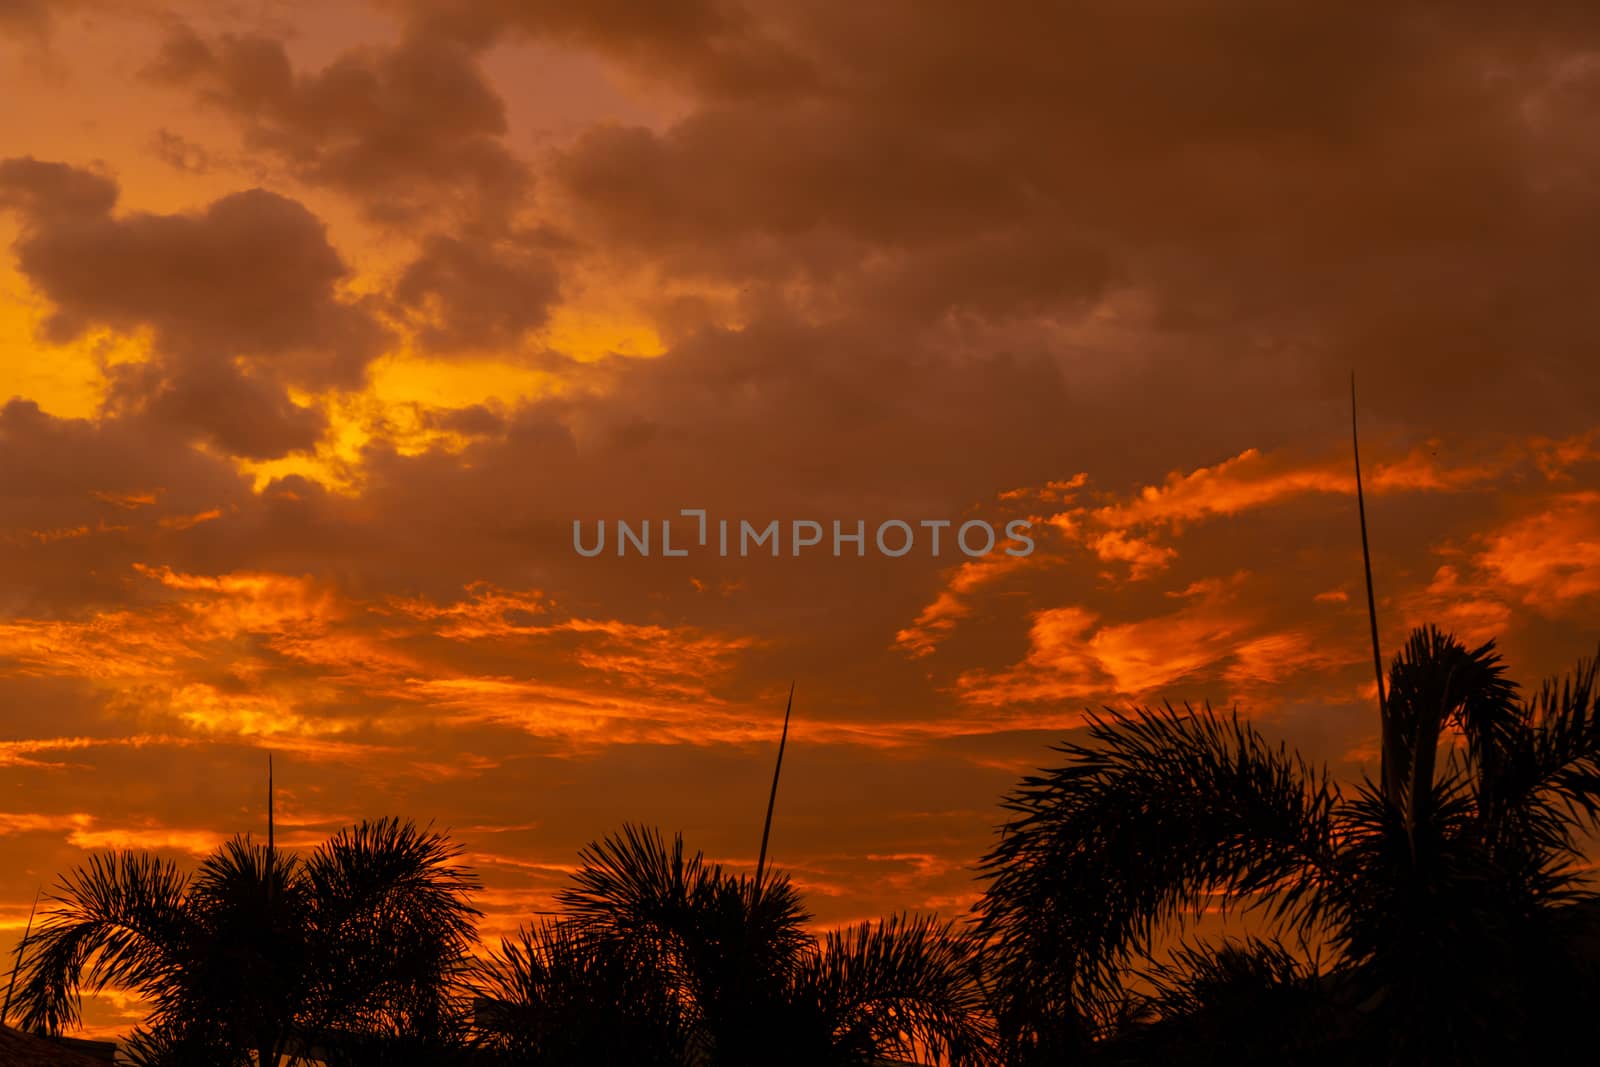 Silhouetted by a palm tree on the background of an unusual fiery red tropical sunset